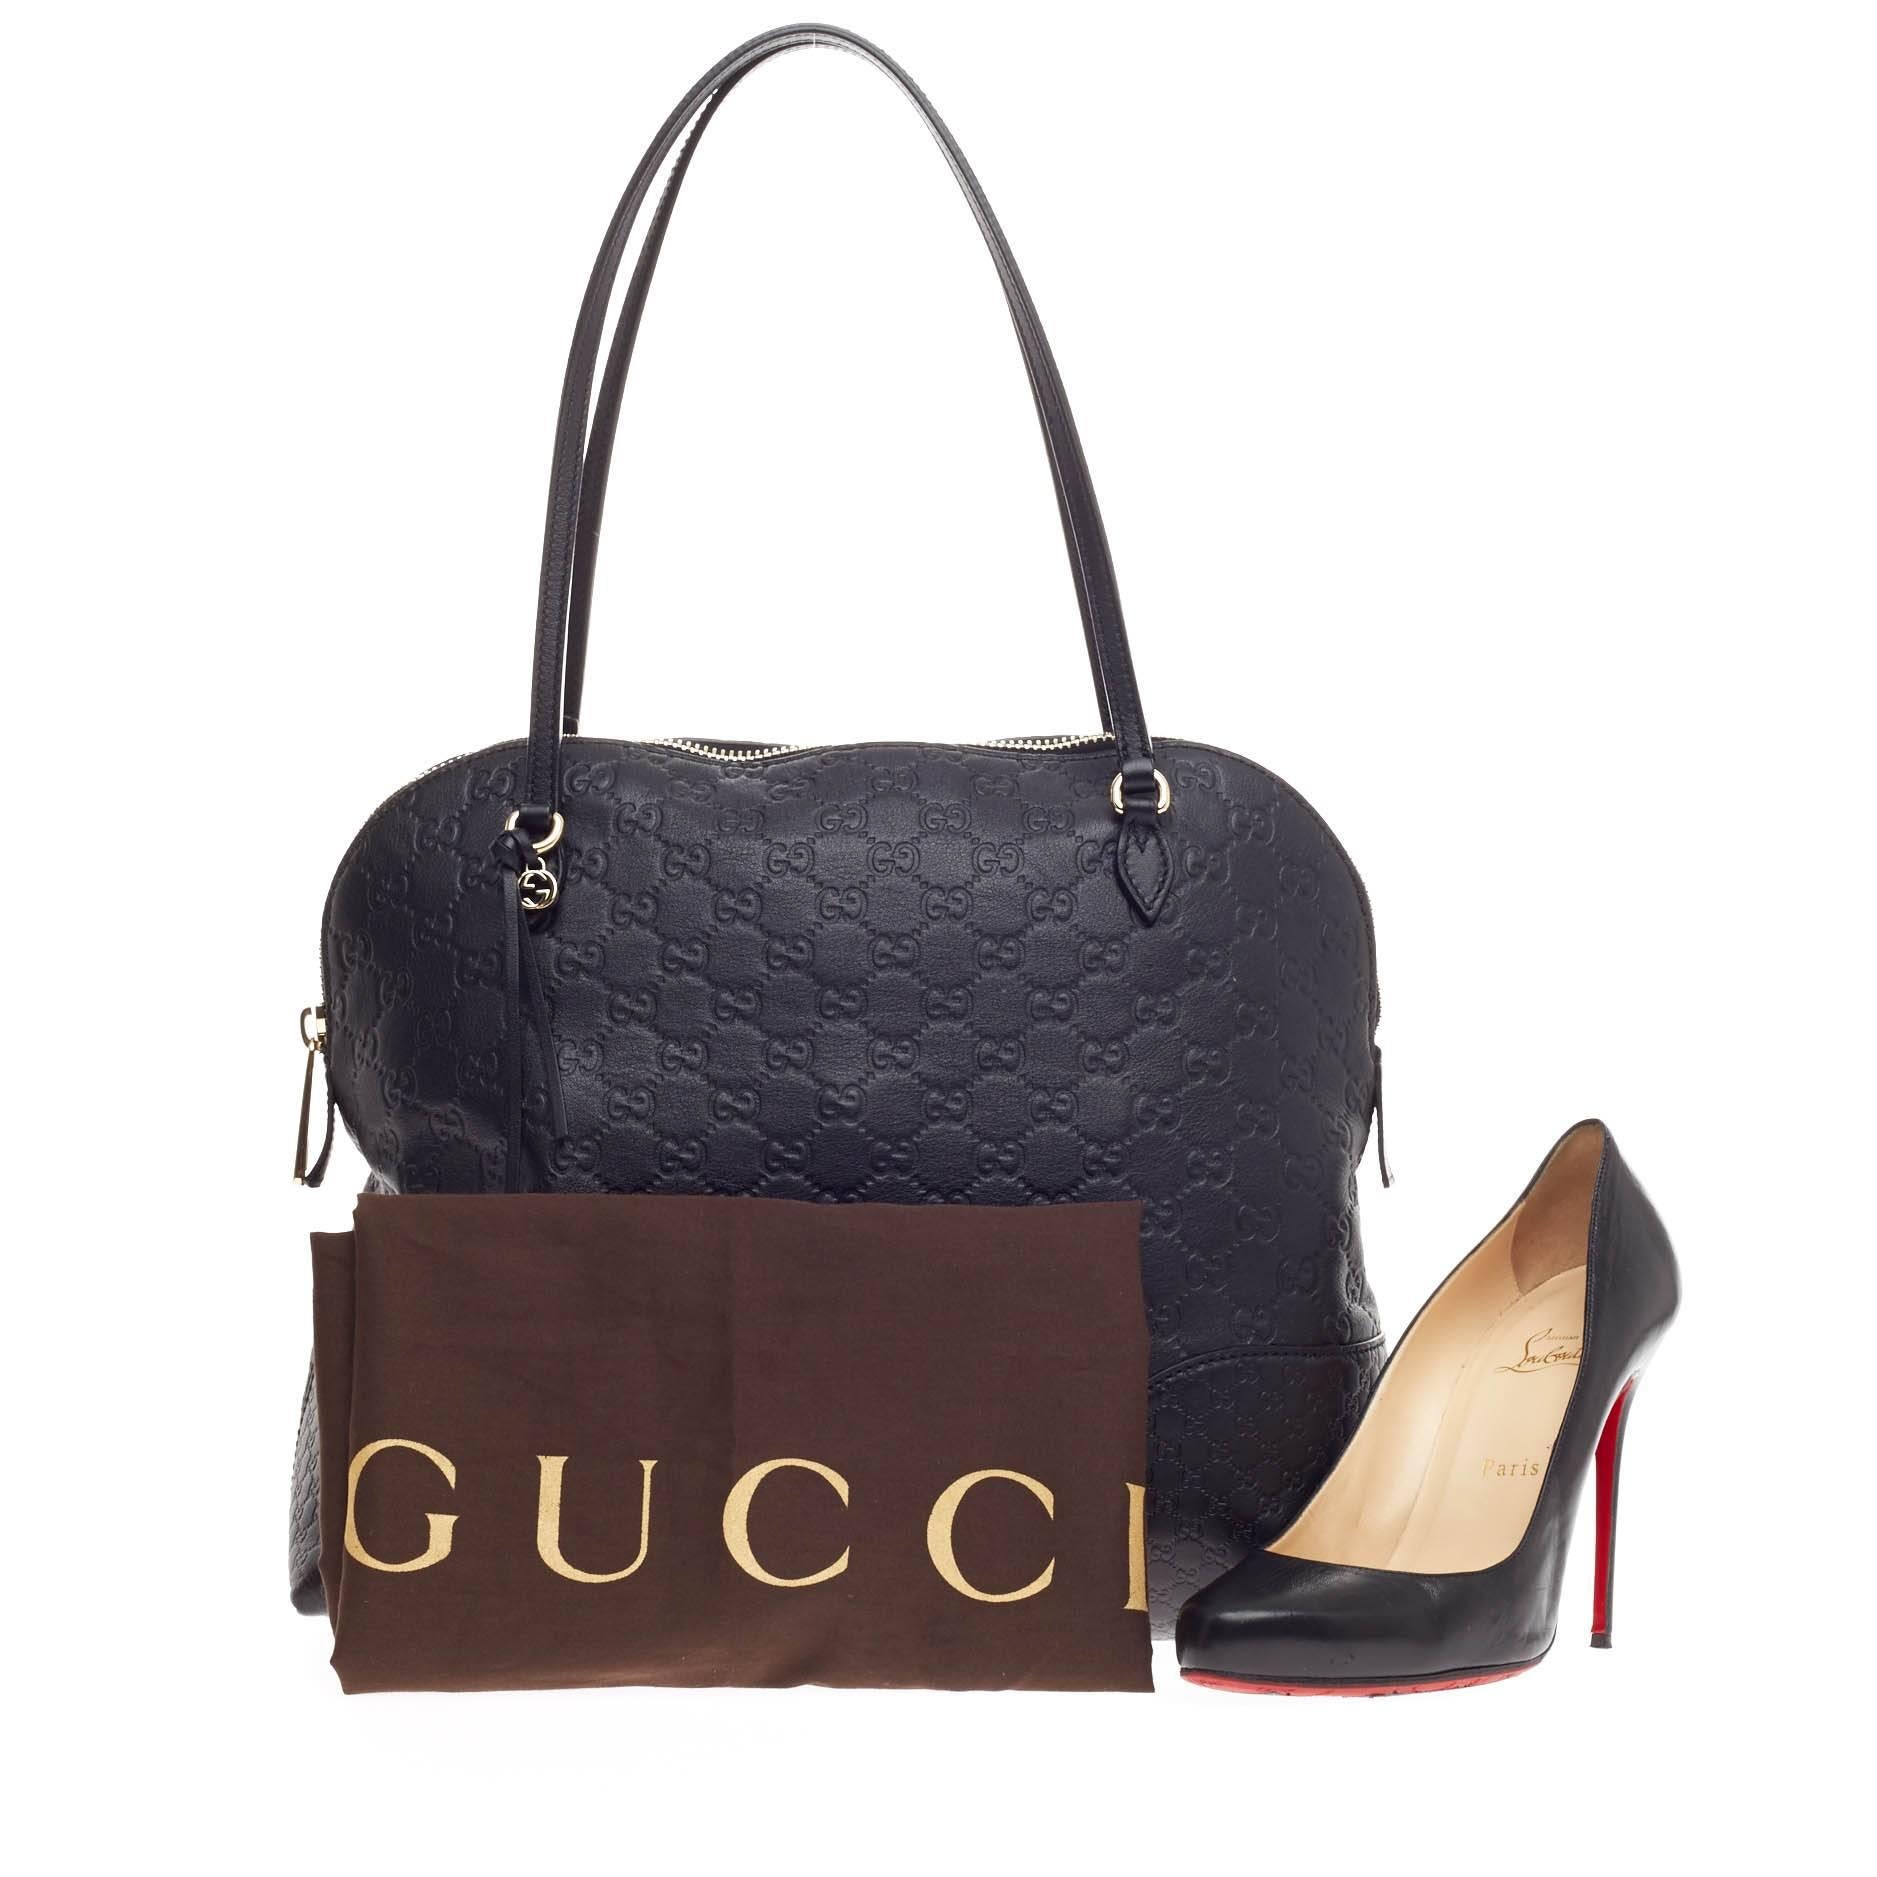 This authentic Gucci Bree Dome Tote Guccissima Leather Medium is perfect for everyday casual look. Crafted in black guccissima leather, this dome-style tote features tall slim handles, small Gucci charm and gold-tone hardware accents. Its top zip